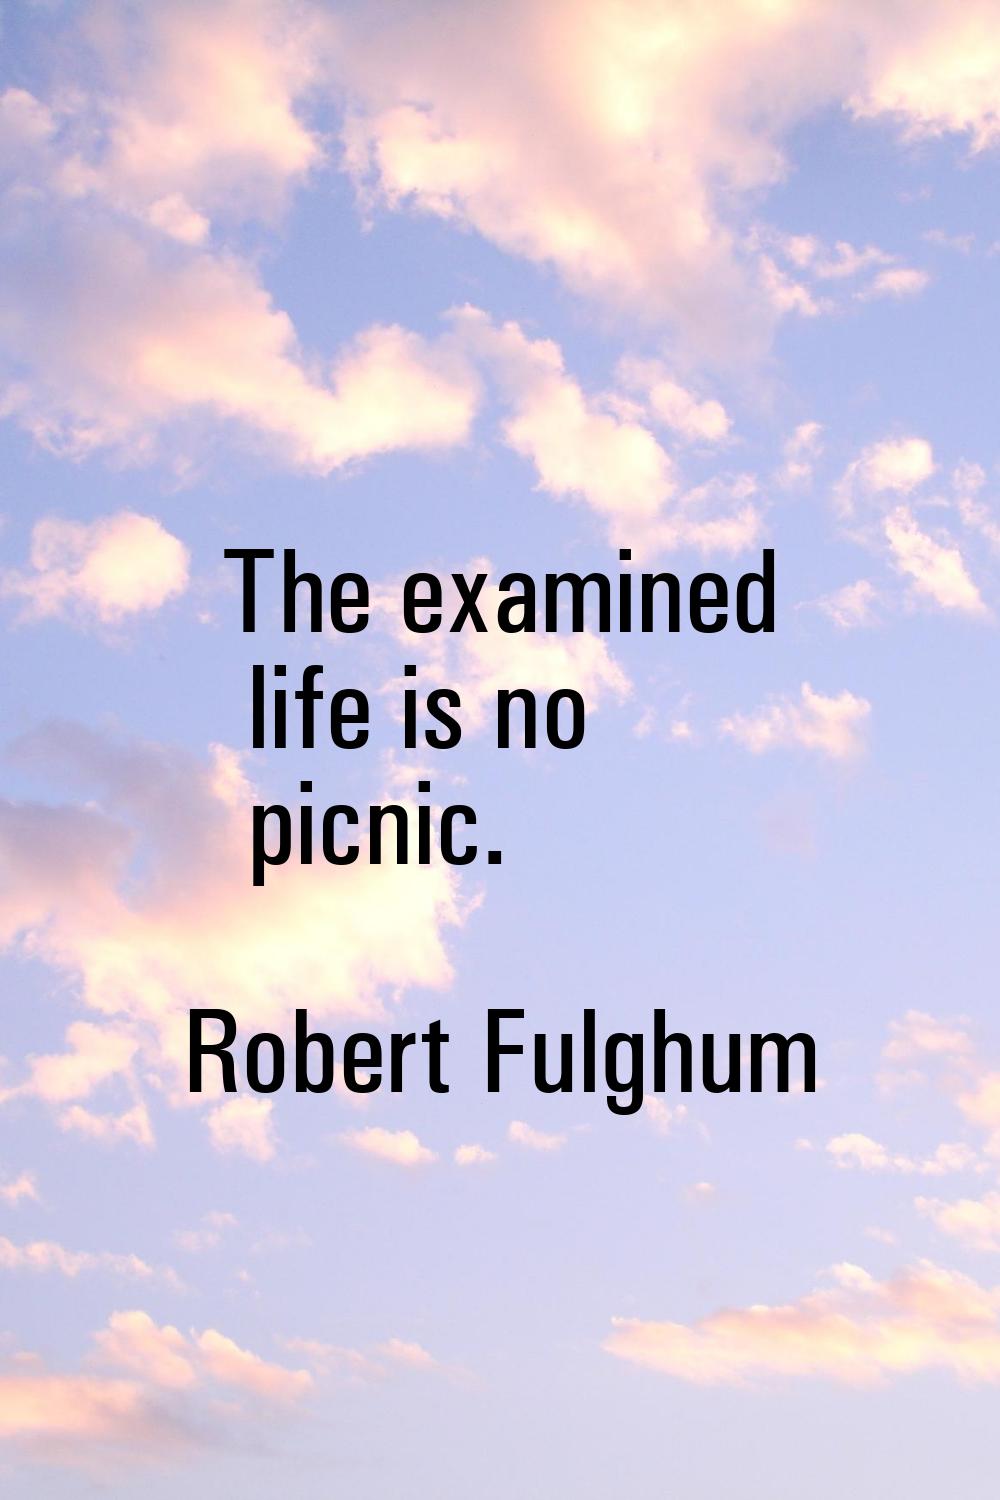 The examined life is no picnic.